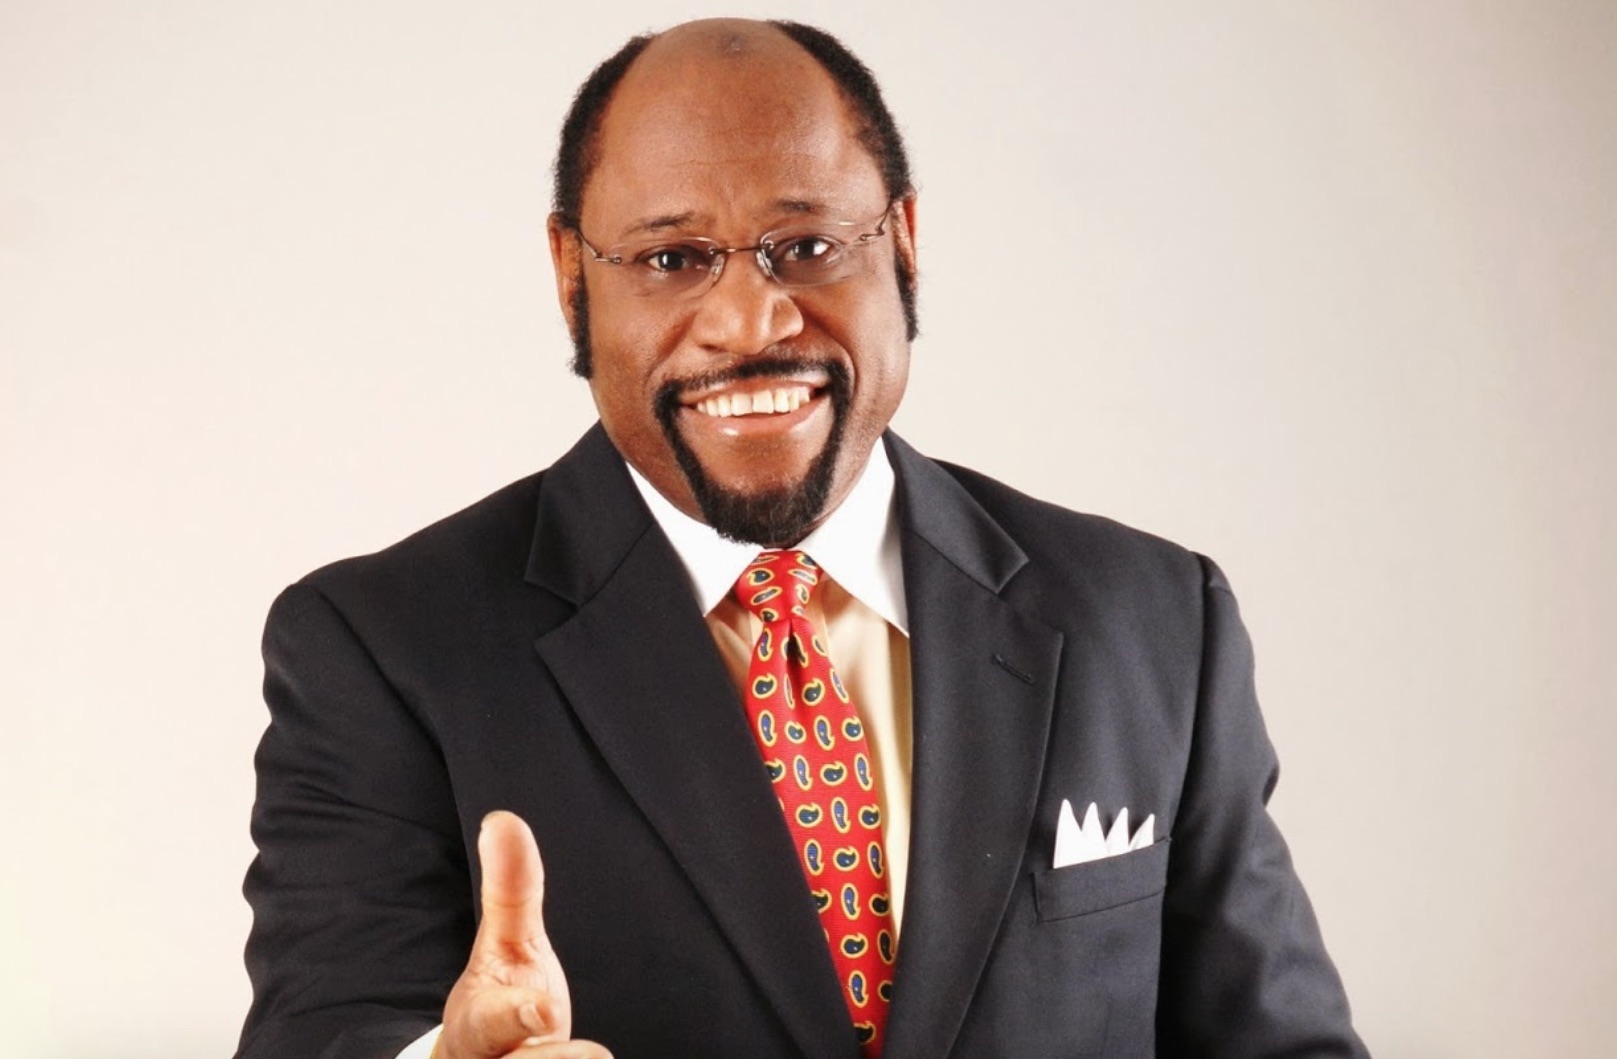 Download Mp3 | All Dr Myles Munroe Messages On Spiritual Growth